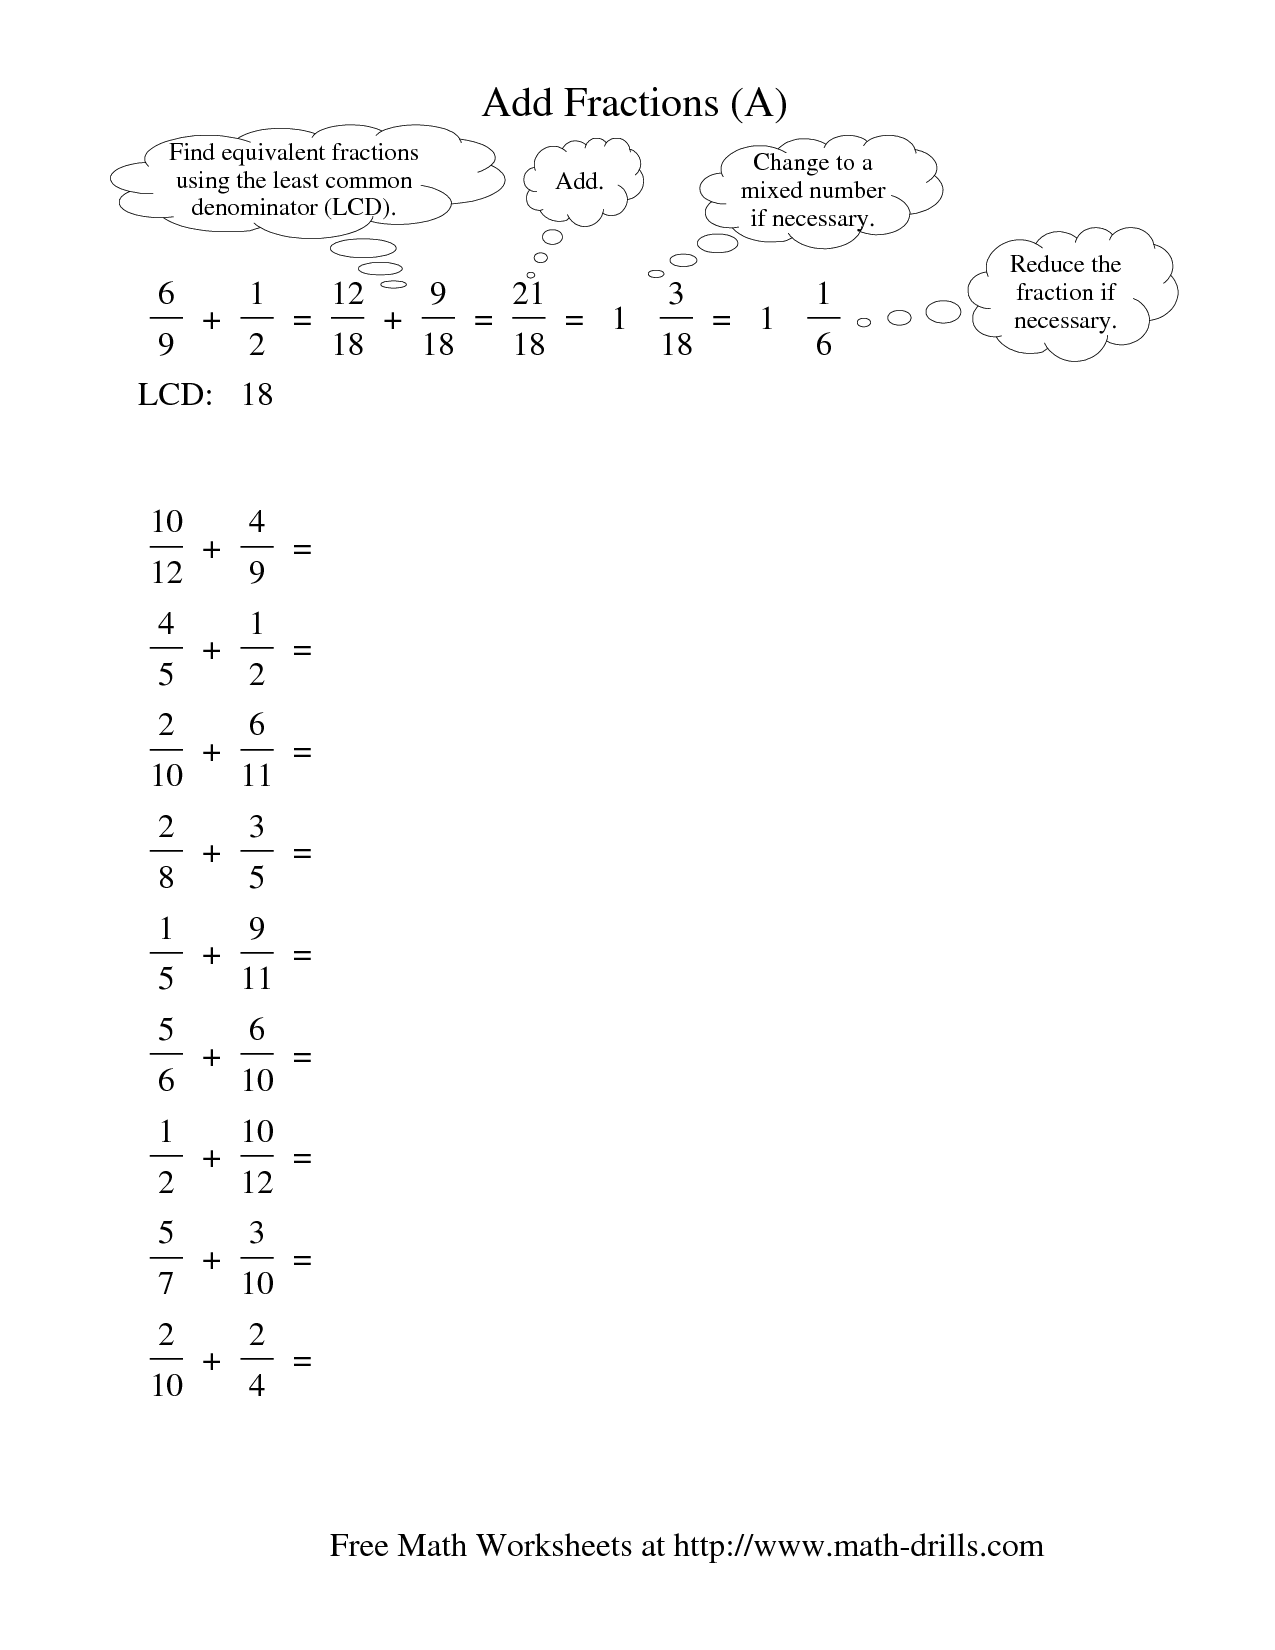 Adding Fractions with Different Denominators Worksheet